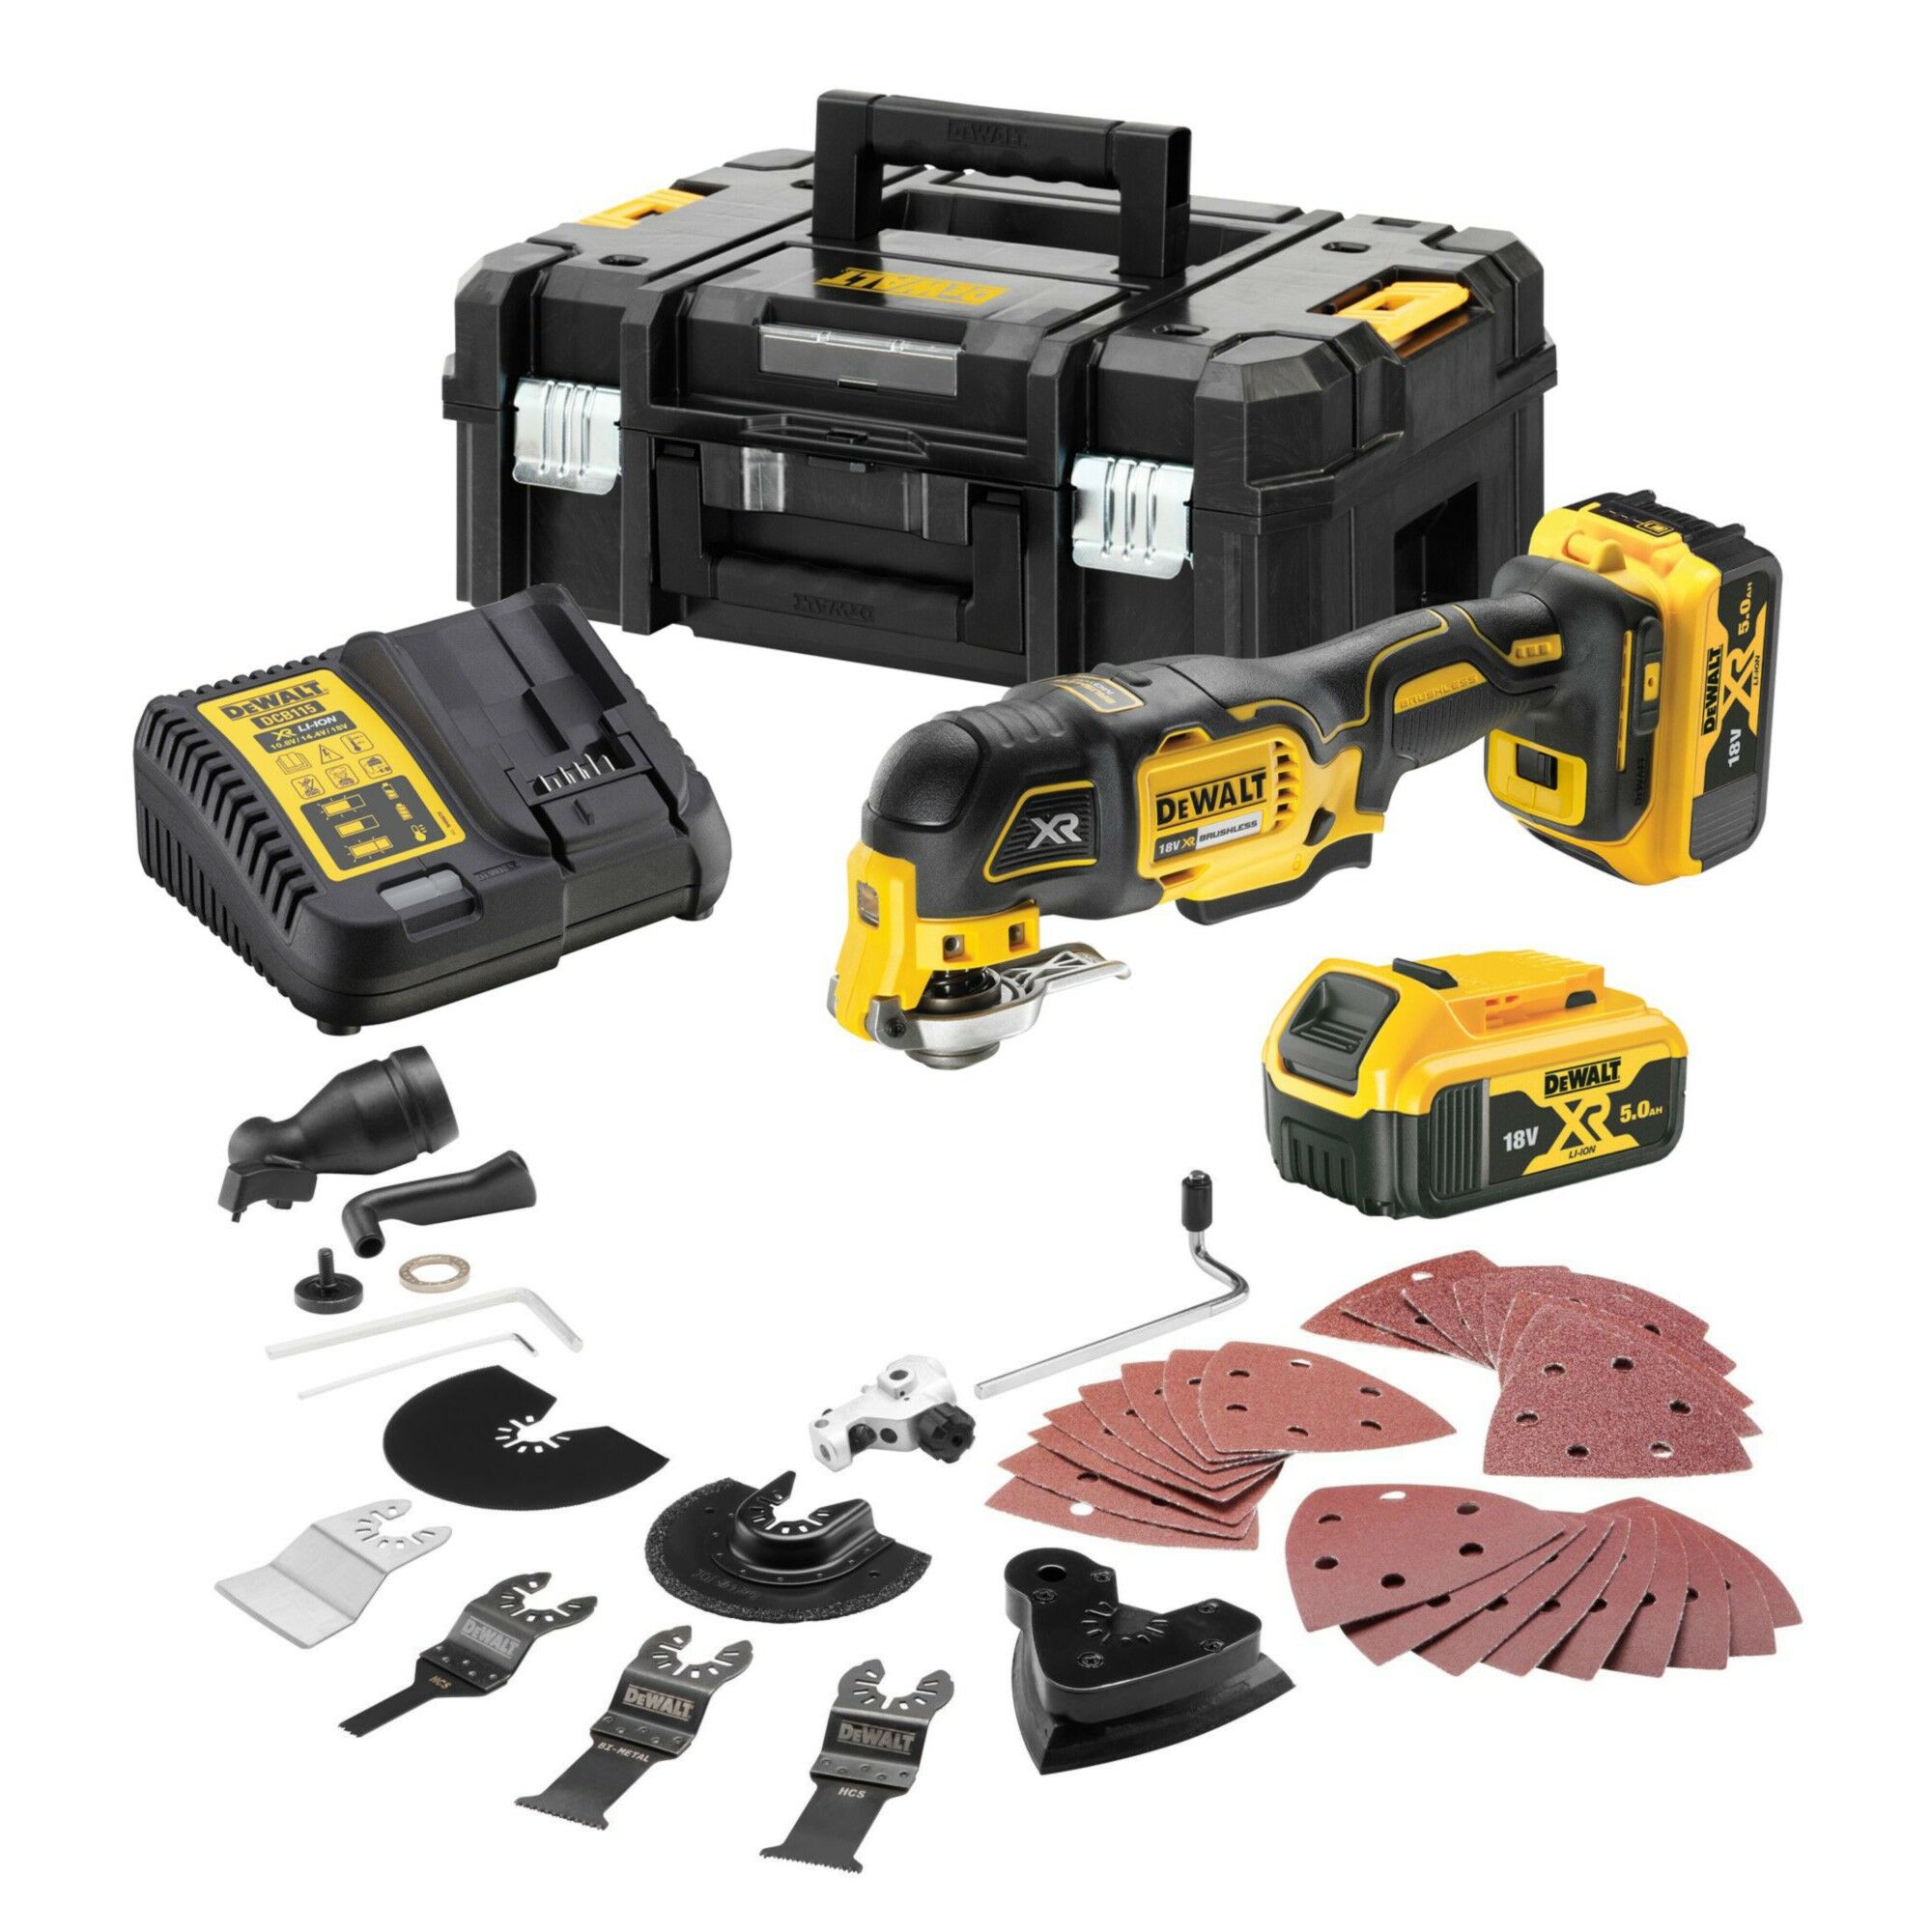 DeWalt DCS356P2-GB 18V XR Brushless 3 Speed Oscillating Multi-Tool Kit - 2x 5Ah Batteries, Charger and Case